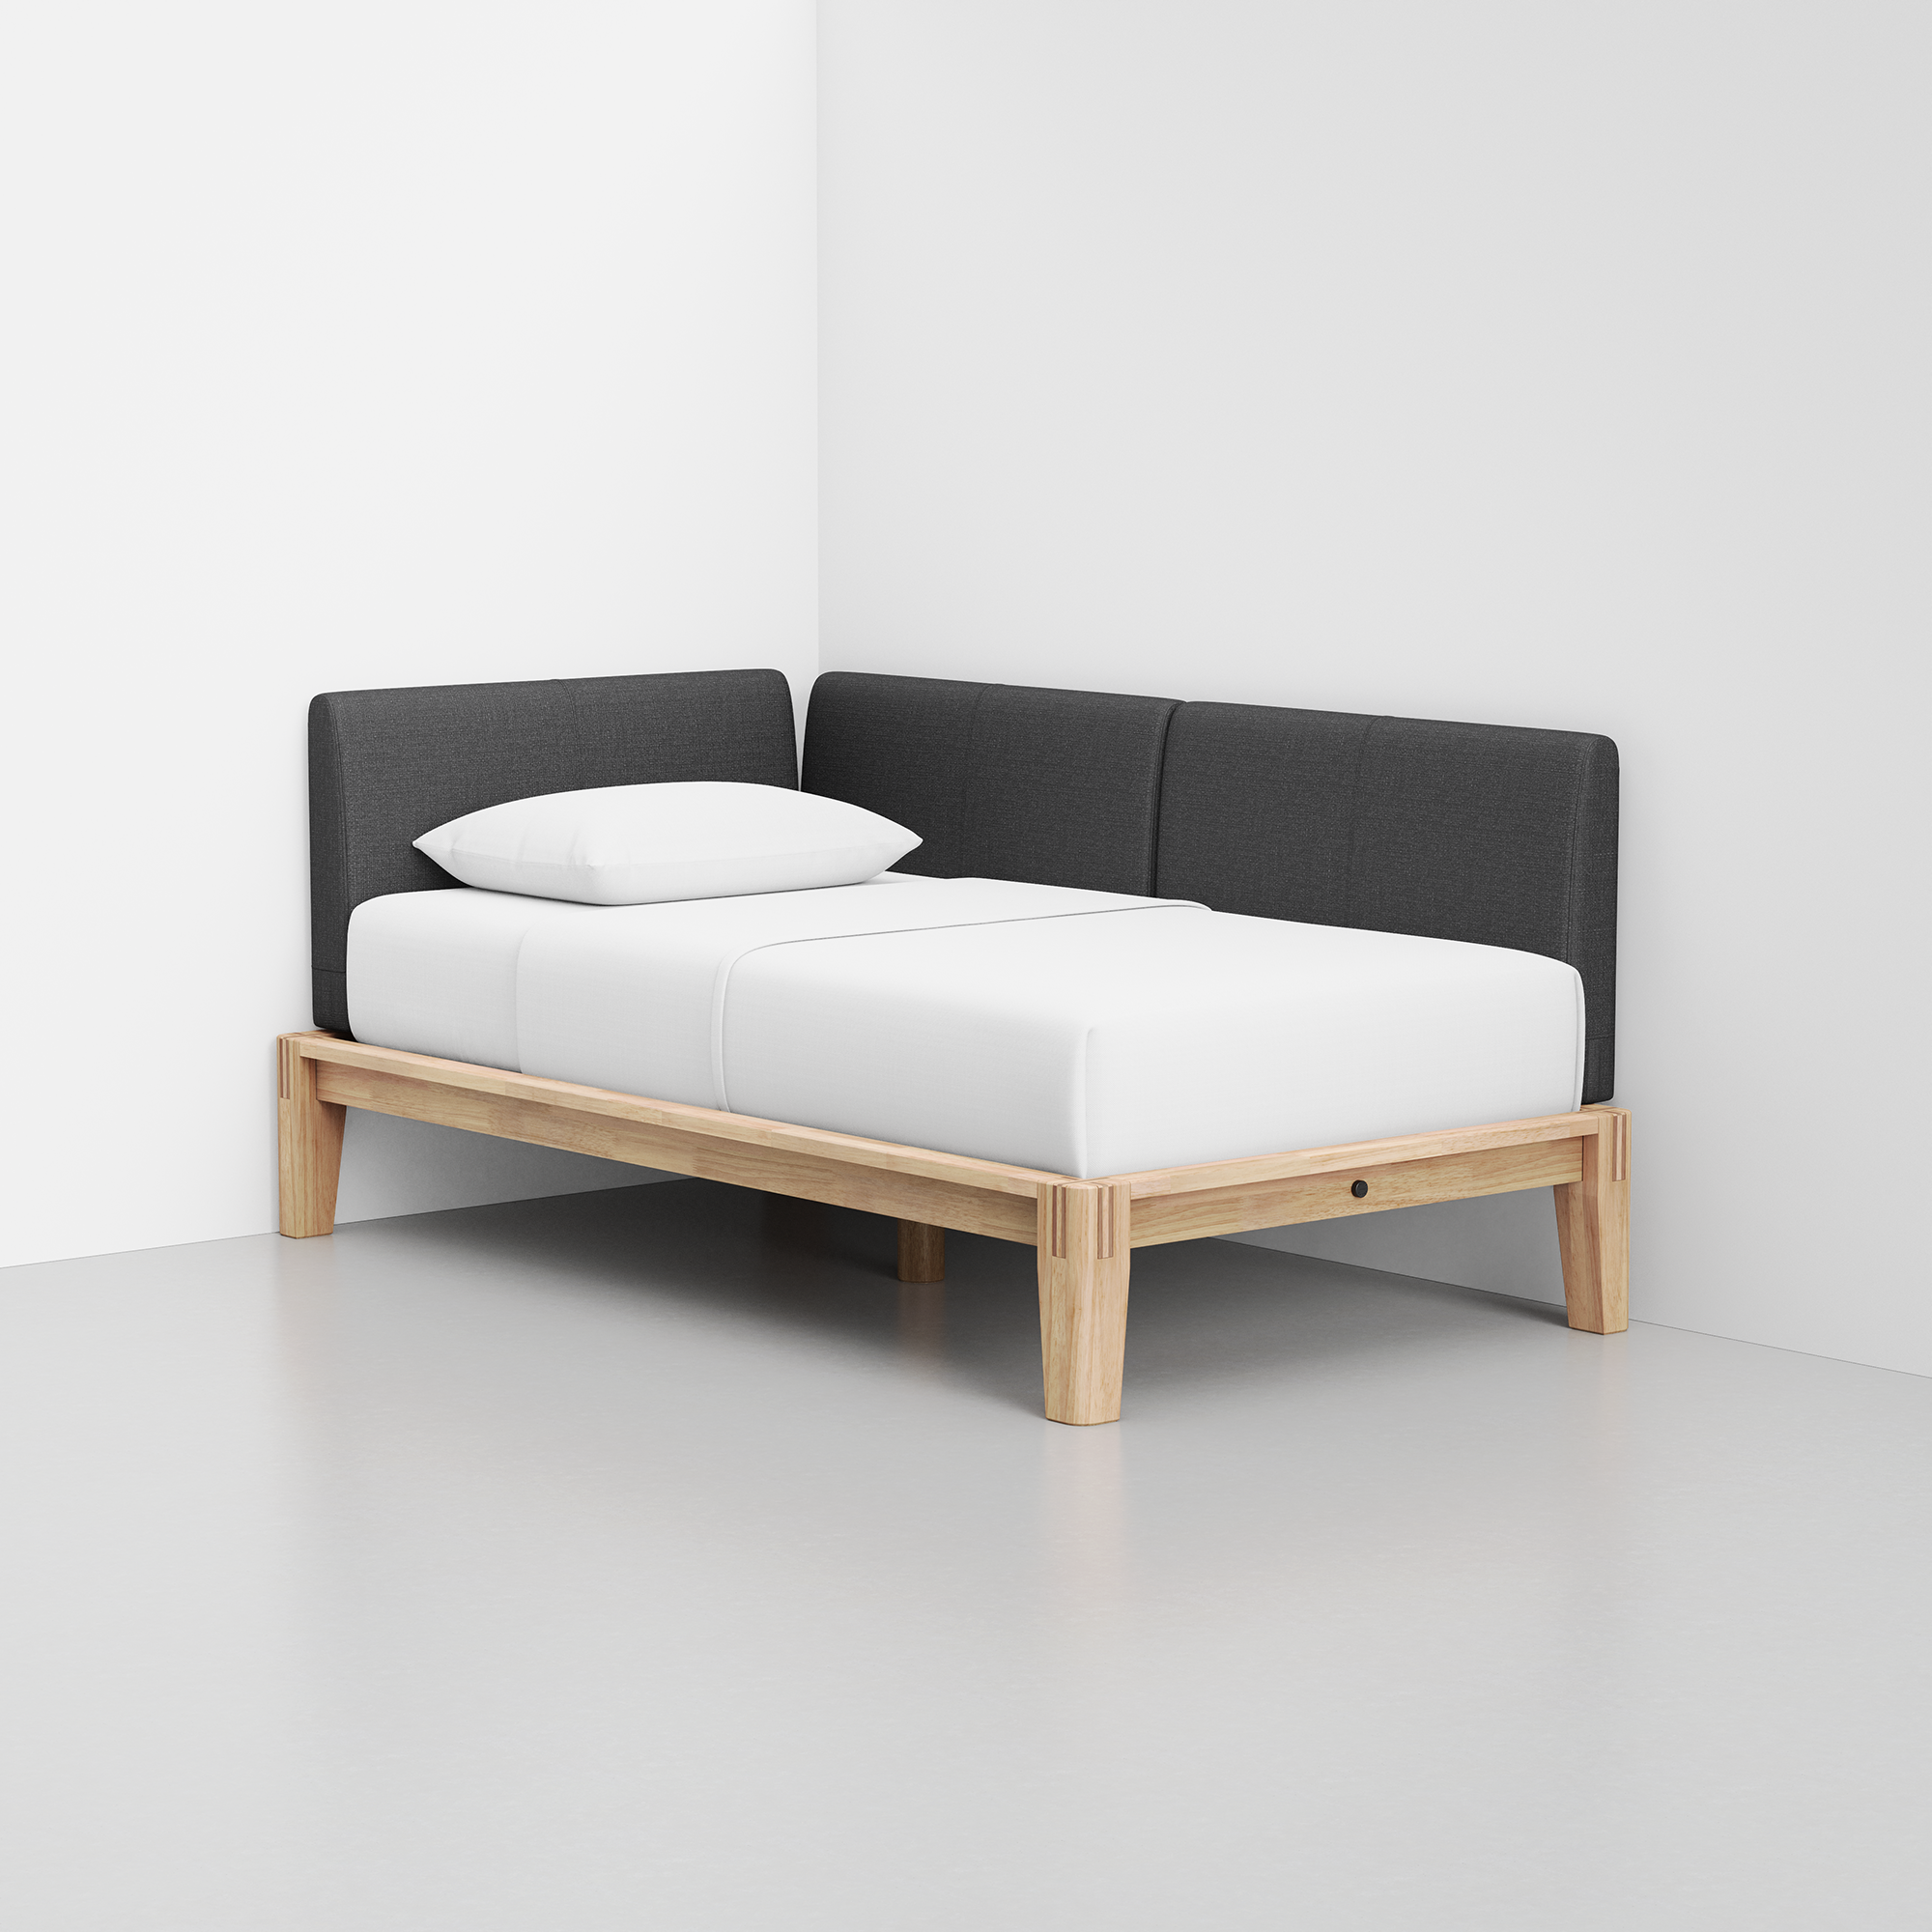 PDP Image: The Daybed (Natural / Dark Charcoal) - Rendering - Front